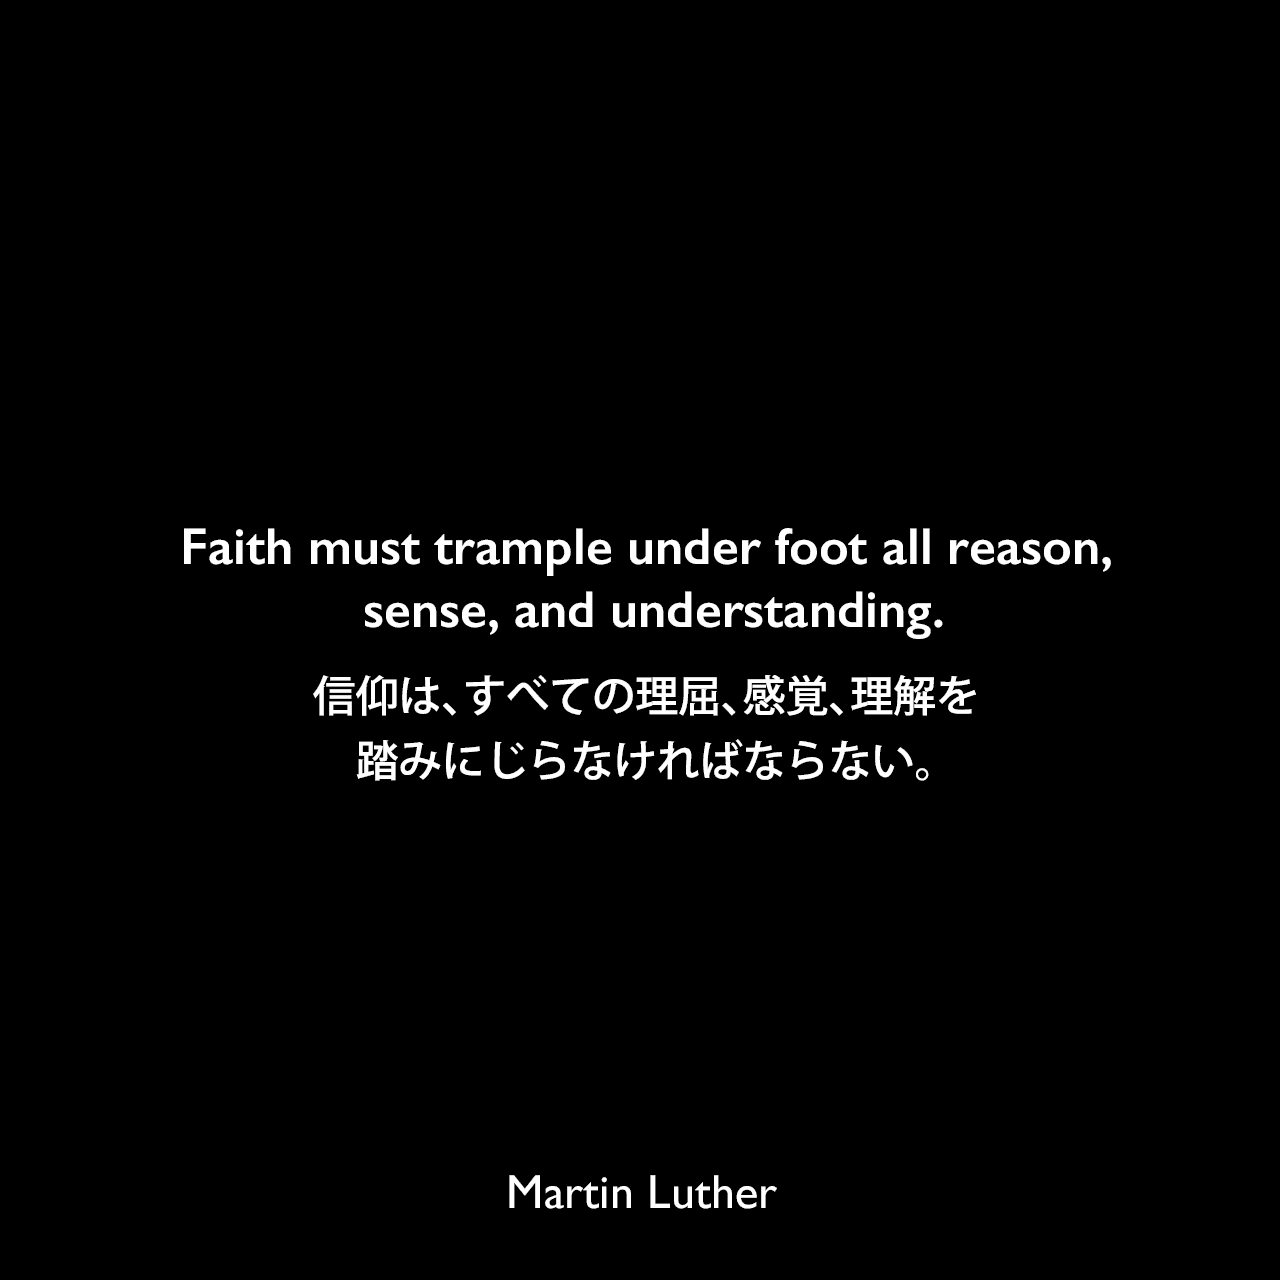 Faith must trample under foot all reason, sense, and understanding.信仰は、すべての理屈、感覚、理解を踏みにじらなければならない。Martin Luther